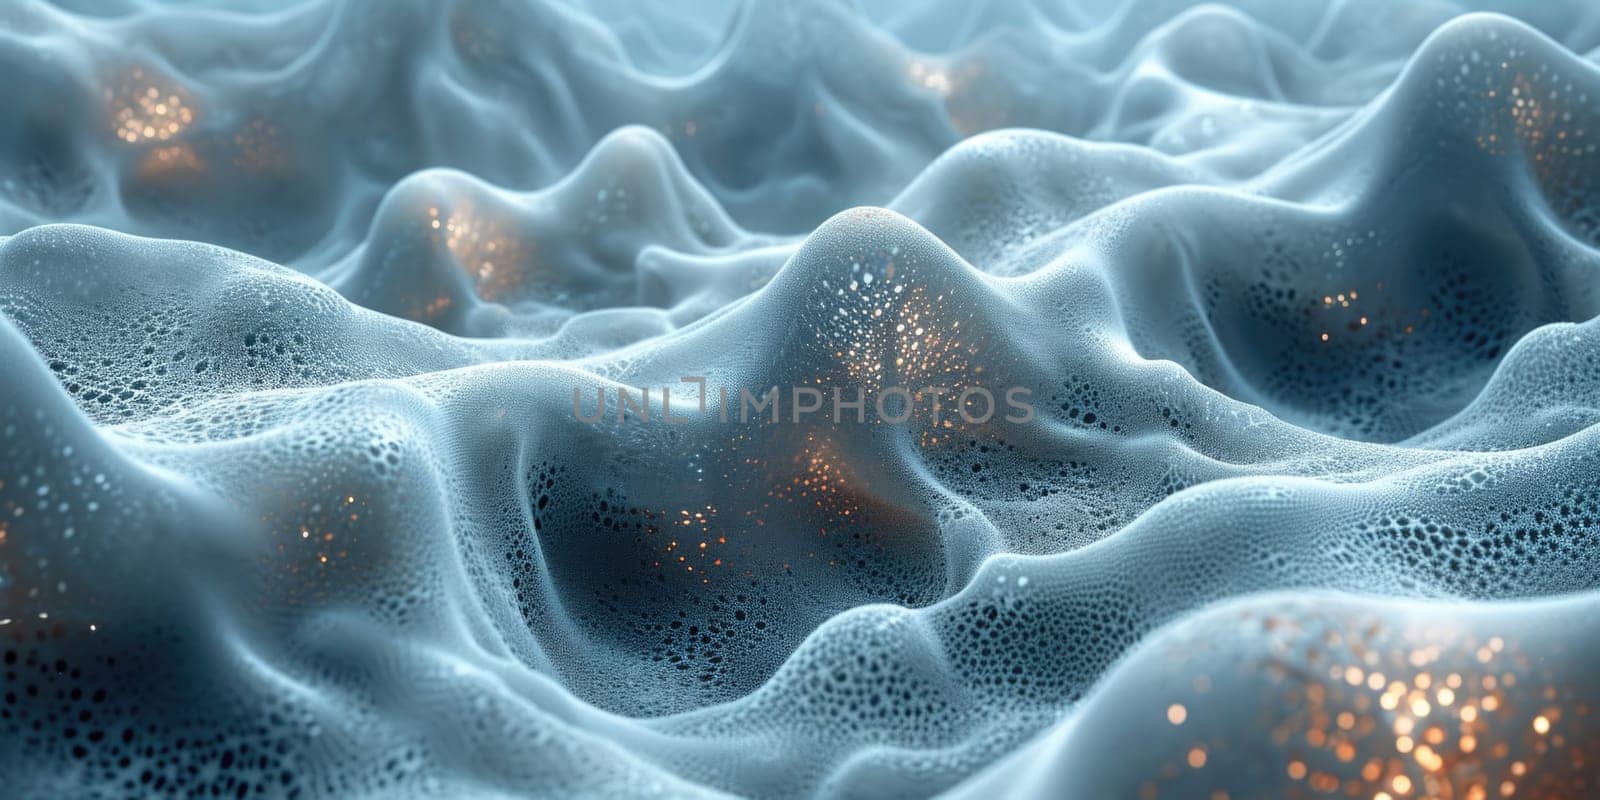 A highly detailed photograph capturing the intricate pattern formed by water.